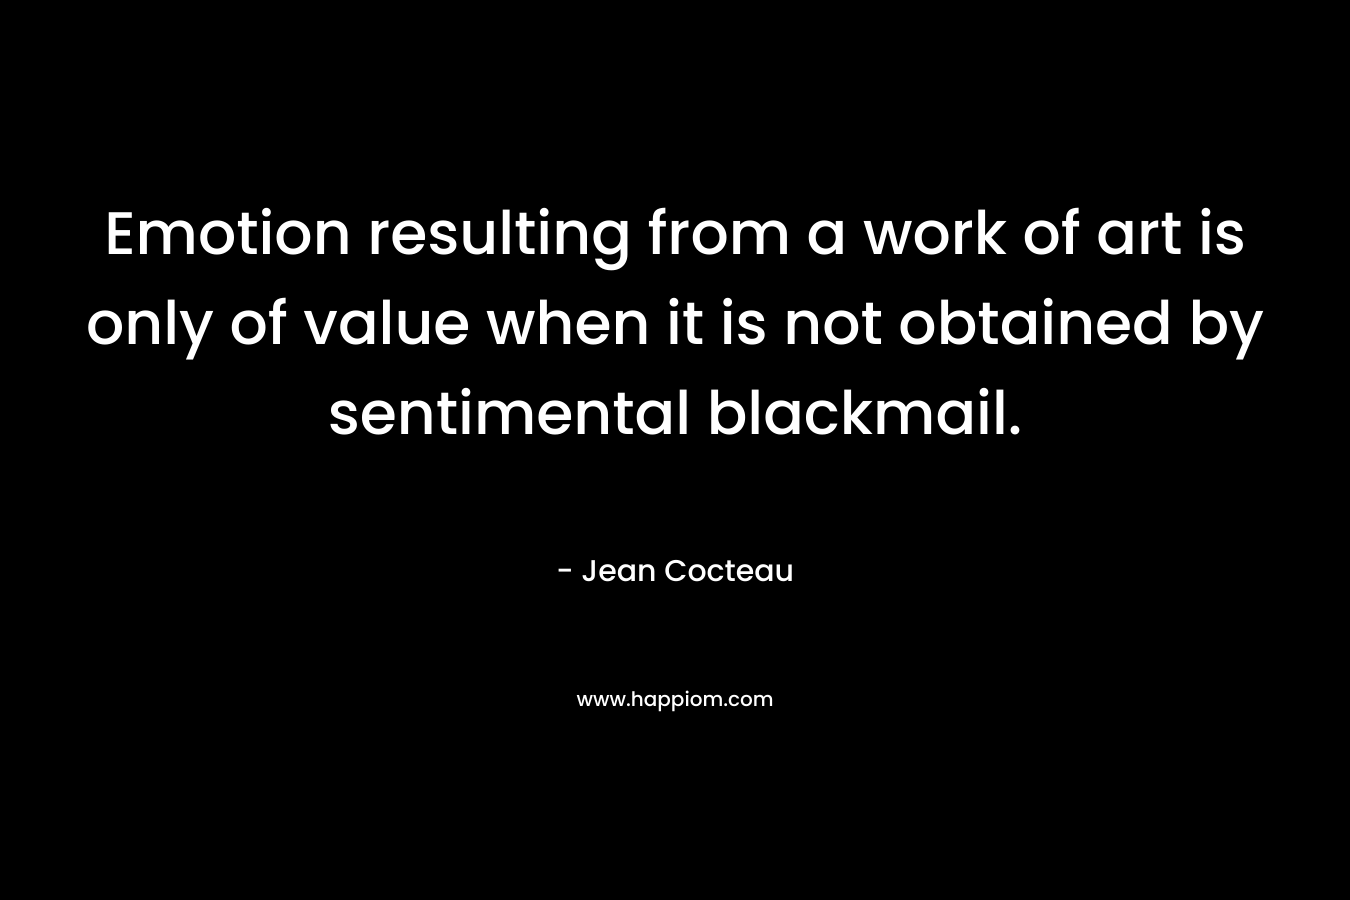 Emotion resulting from a work of art is only of value when it is not obtained by sentimental blackmail.